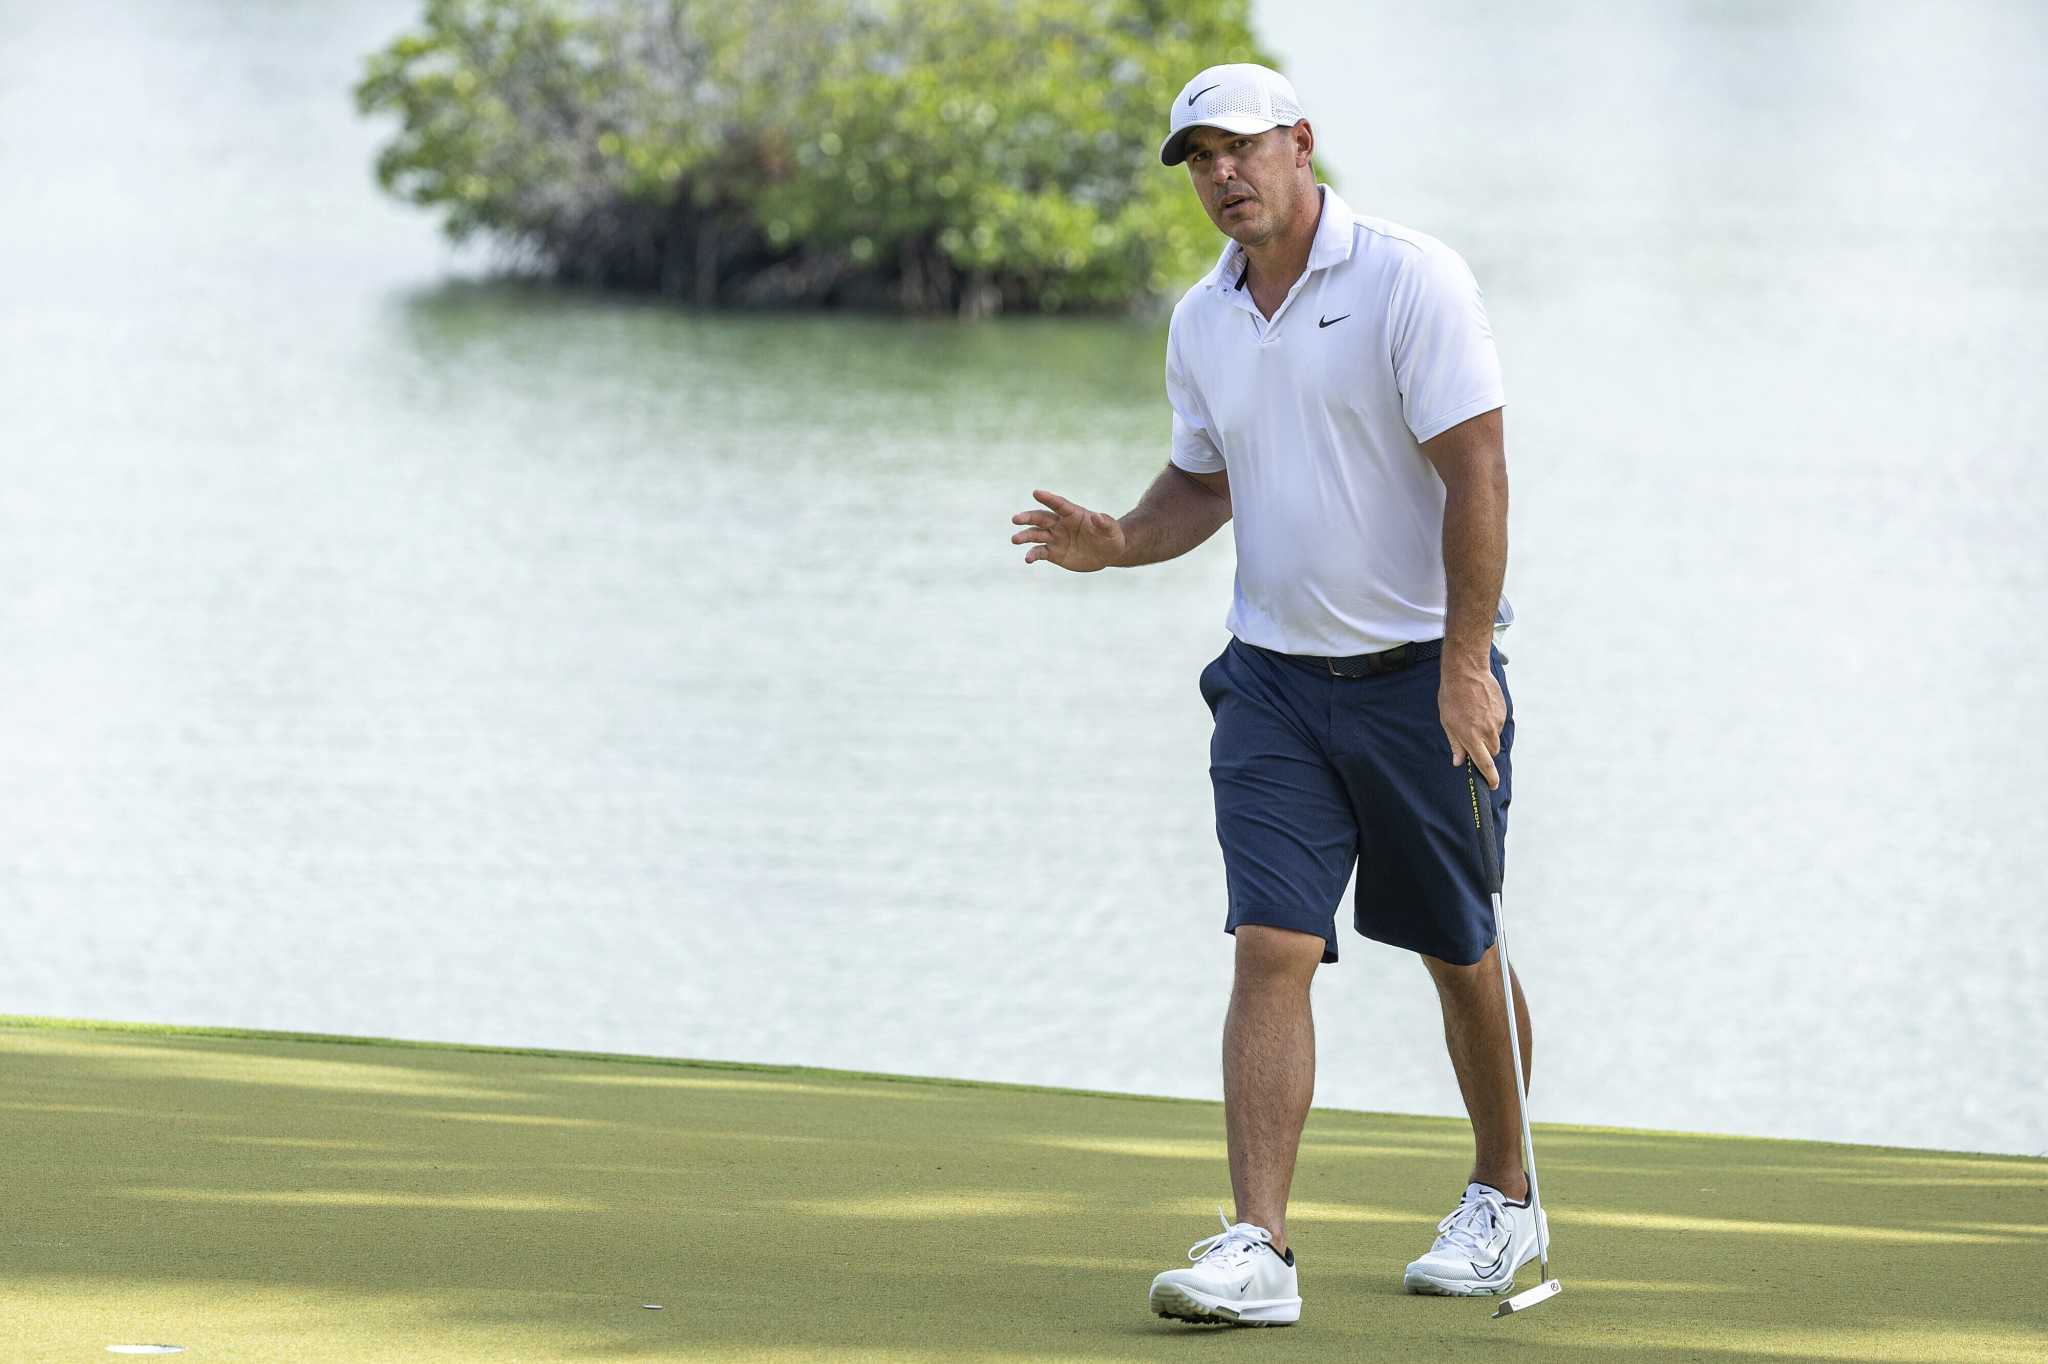 Brooks Koepka wins LIV Golf in Singapore for his fourth victory on the circuit